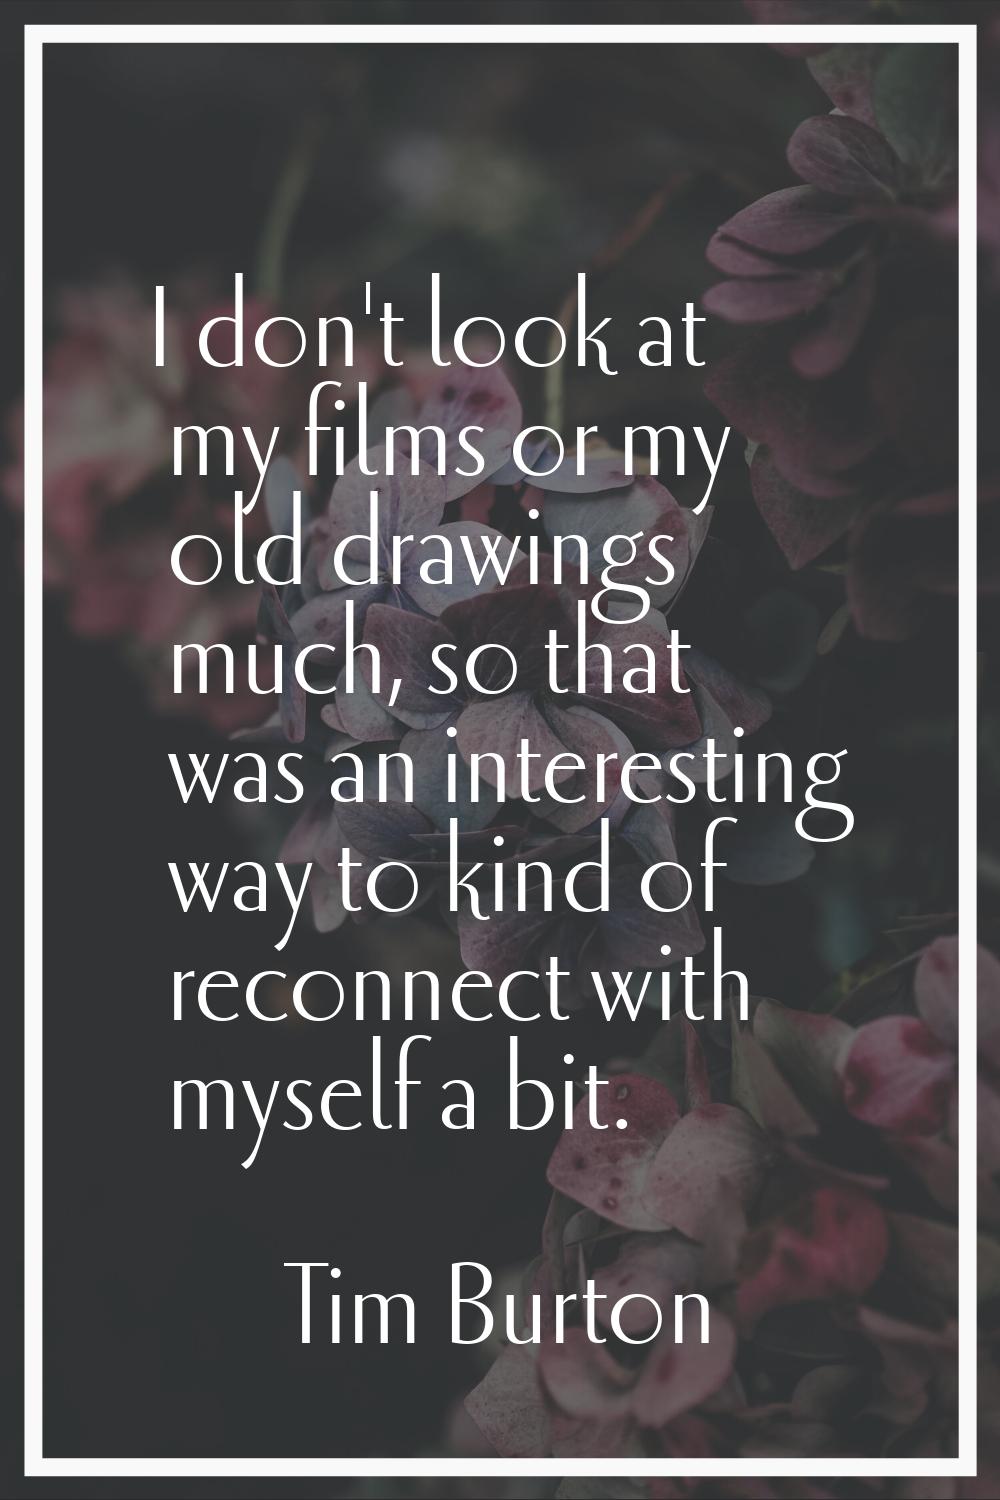 I don't look at my films or my old drawings much, so that was an interesting way to kind of reconne